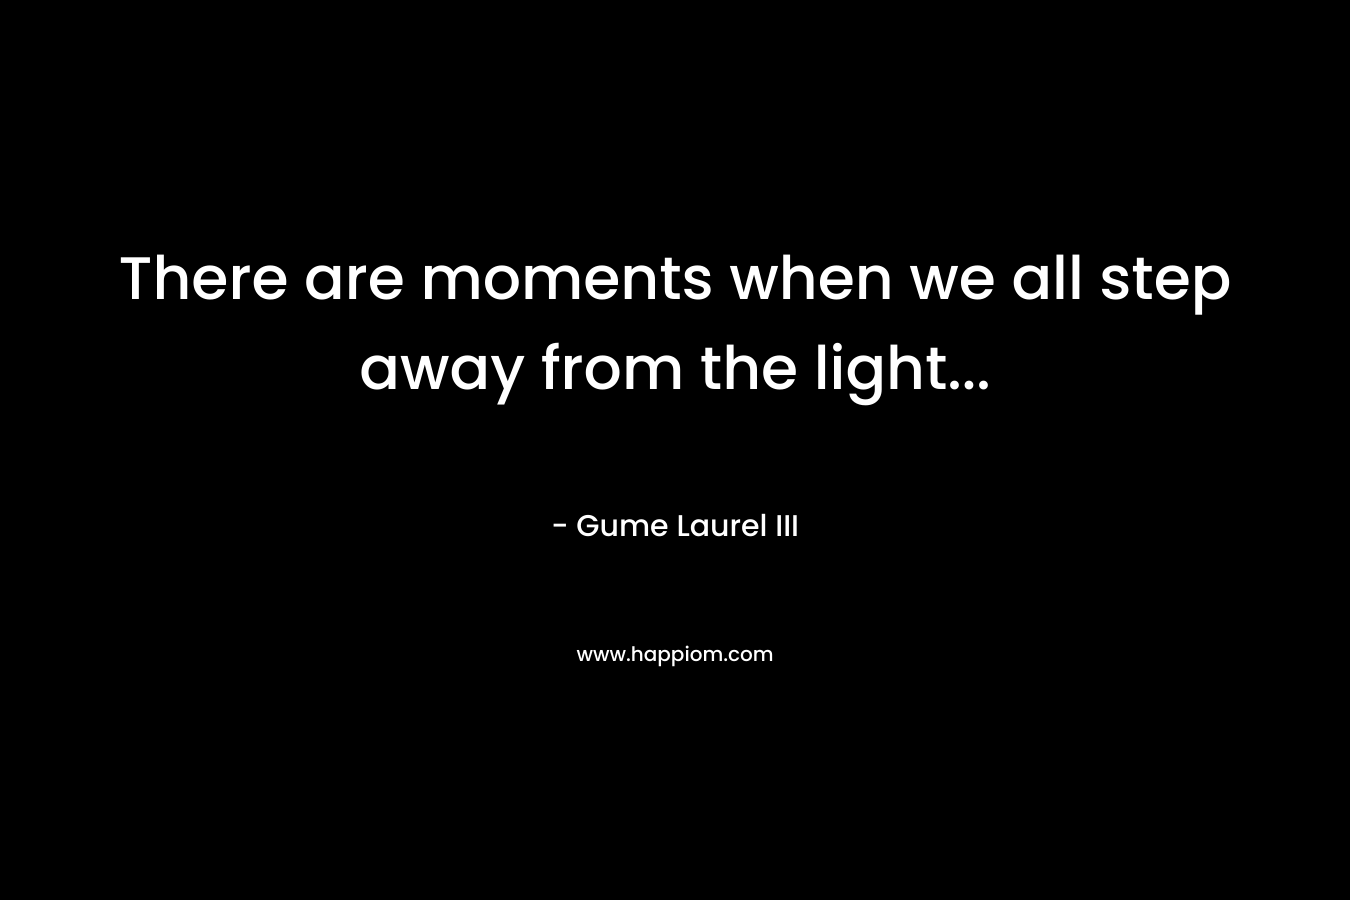 There are moments when we all step away from the light...